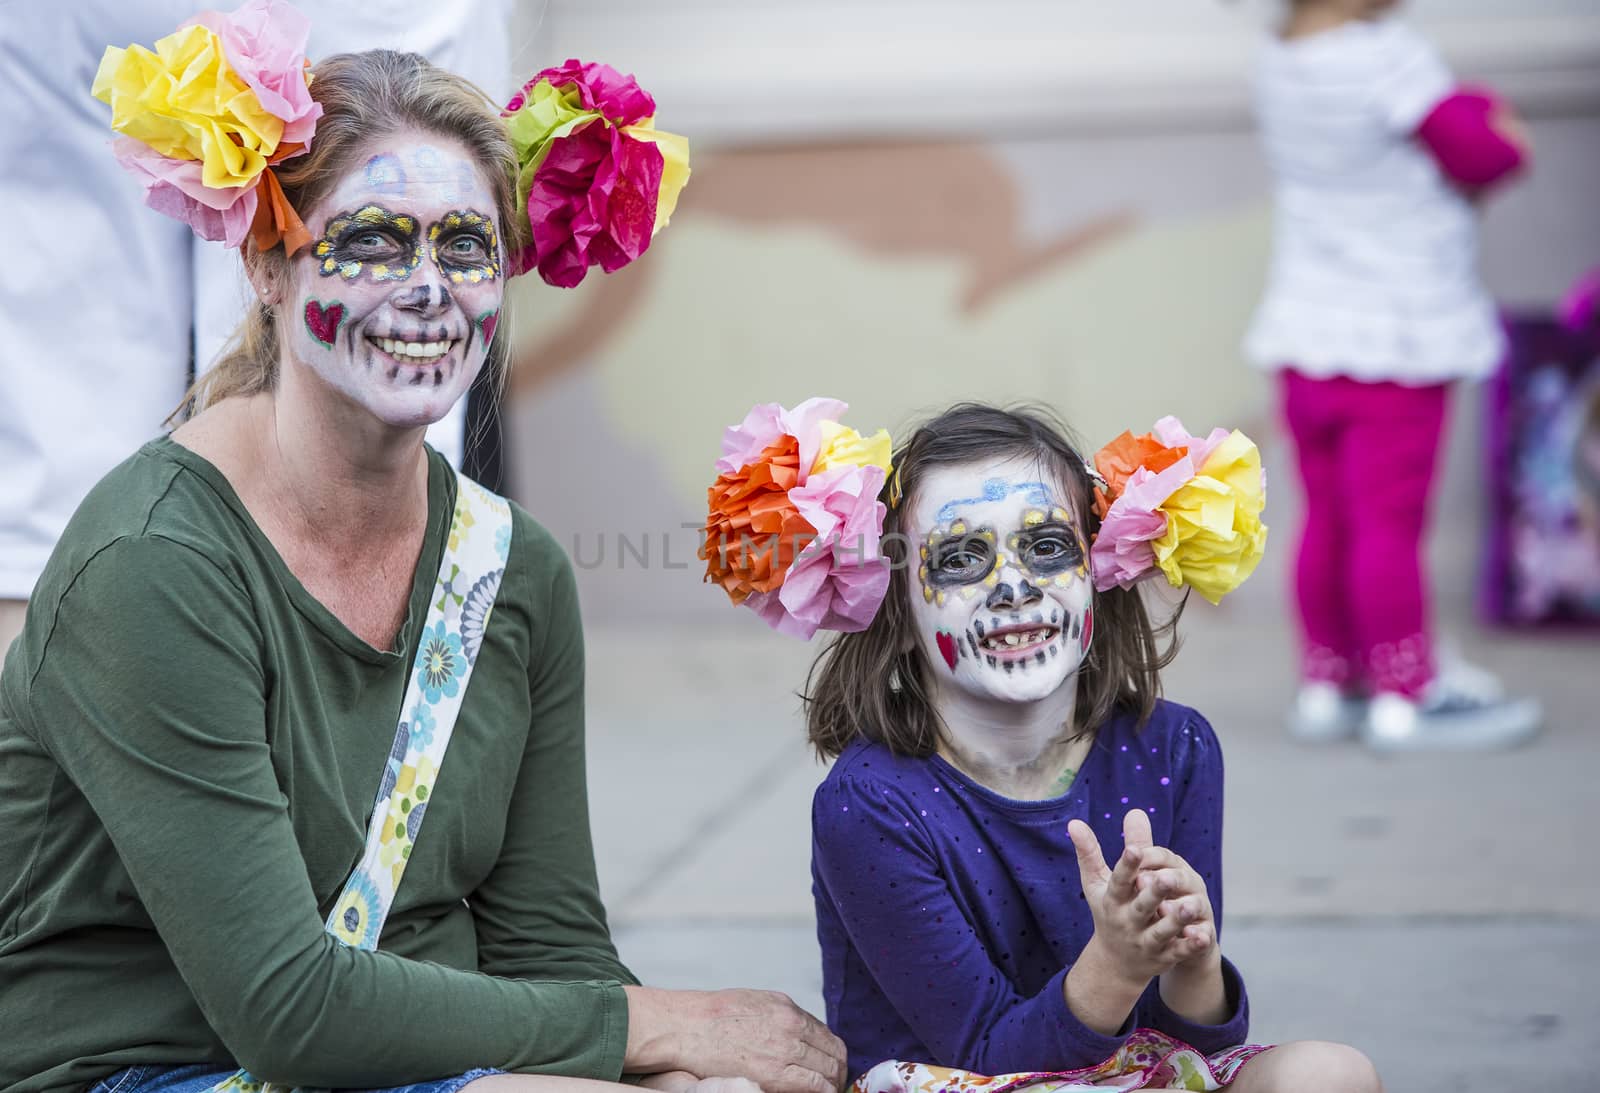 TUCSON, AZ/USA - NOVEMBER 09: Unidentified woman and girl in facepaint at the All Souls Procession on November 09, 2014 in Tucson, AZ, USA.